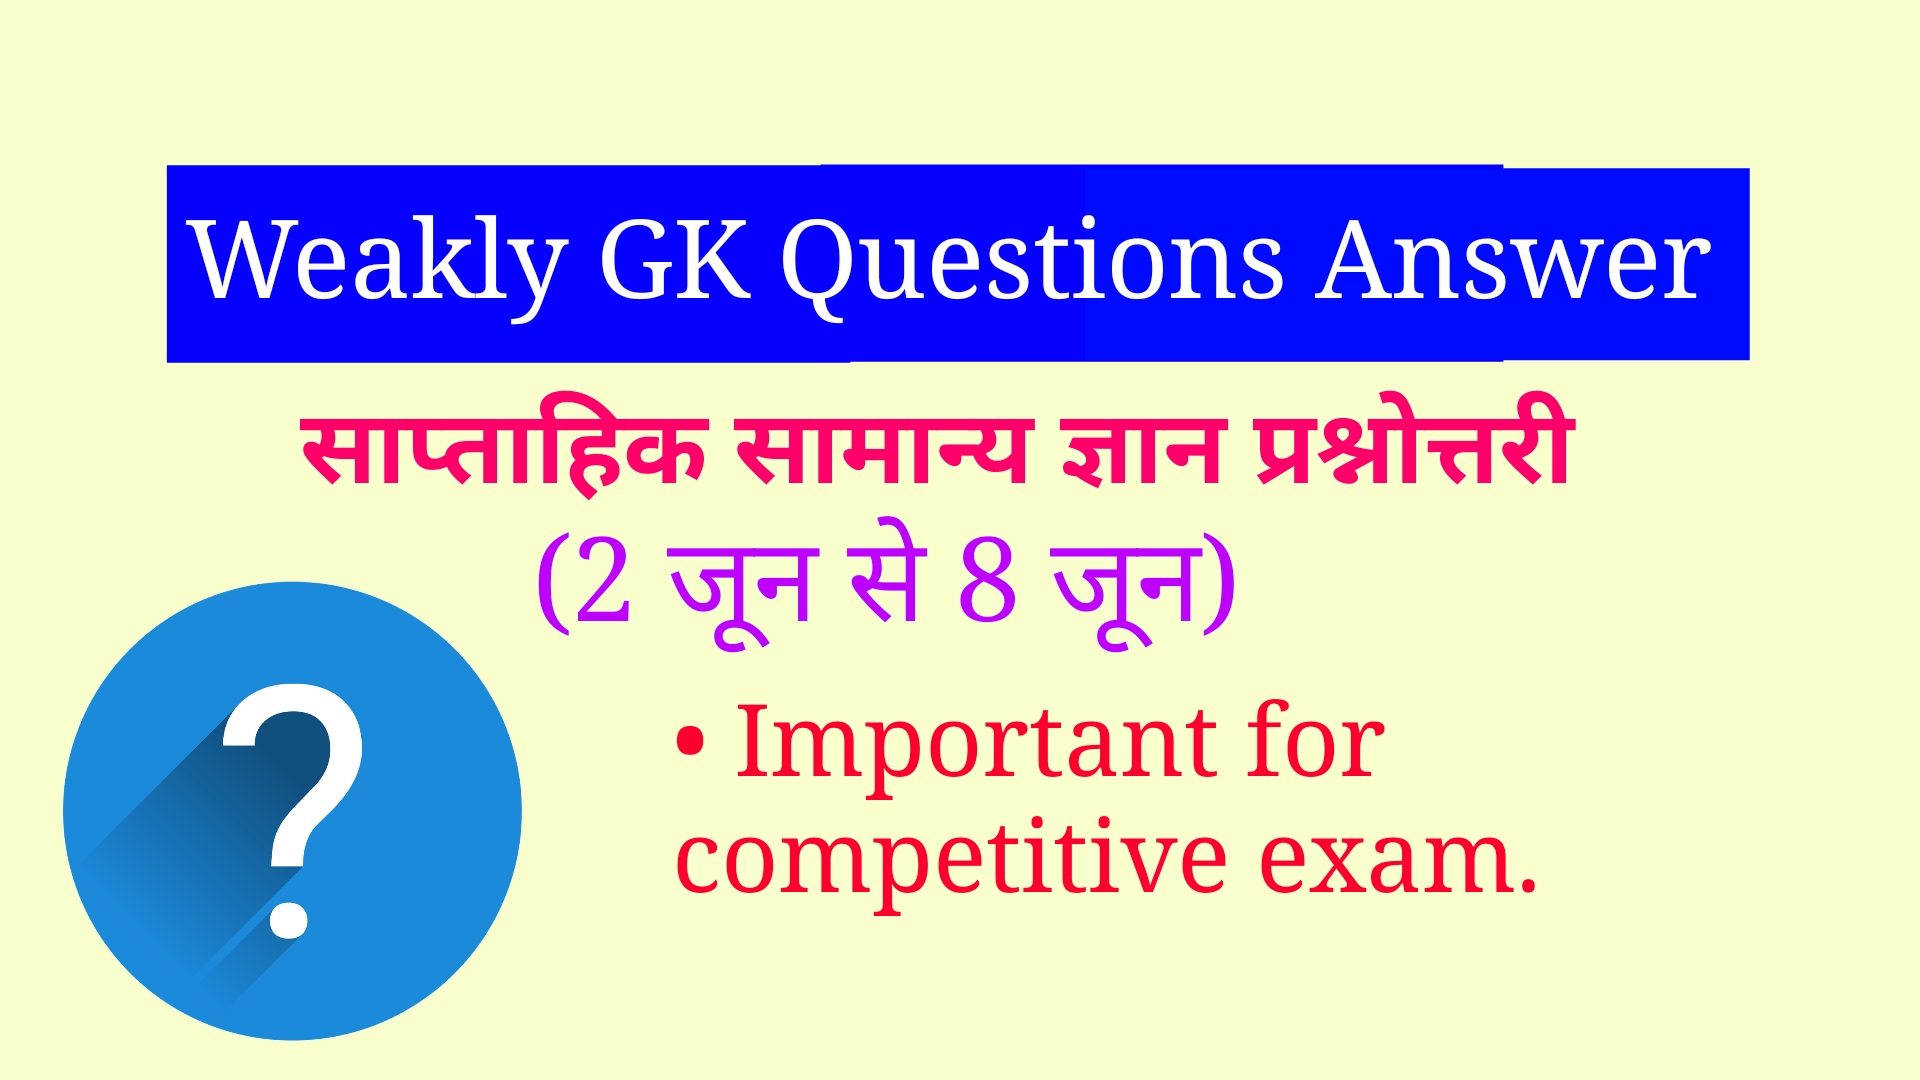 Weakly GK questions answer